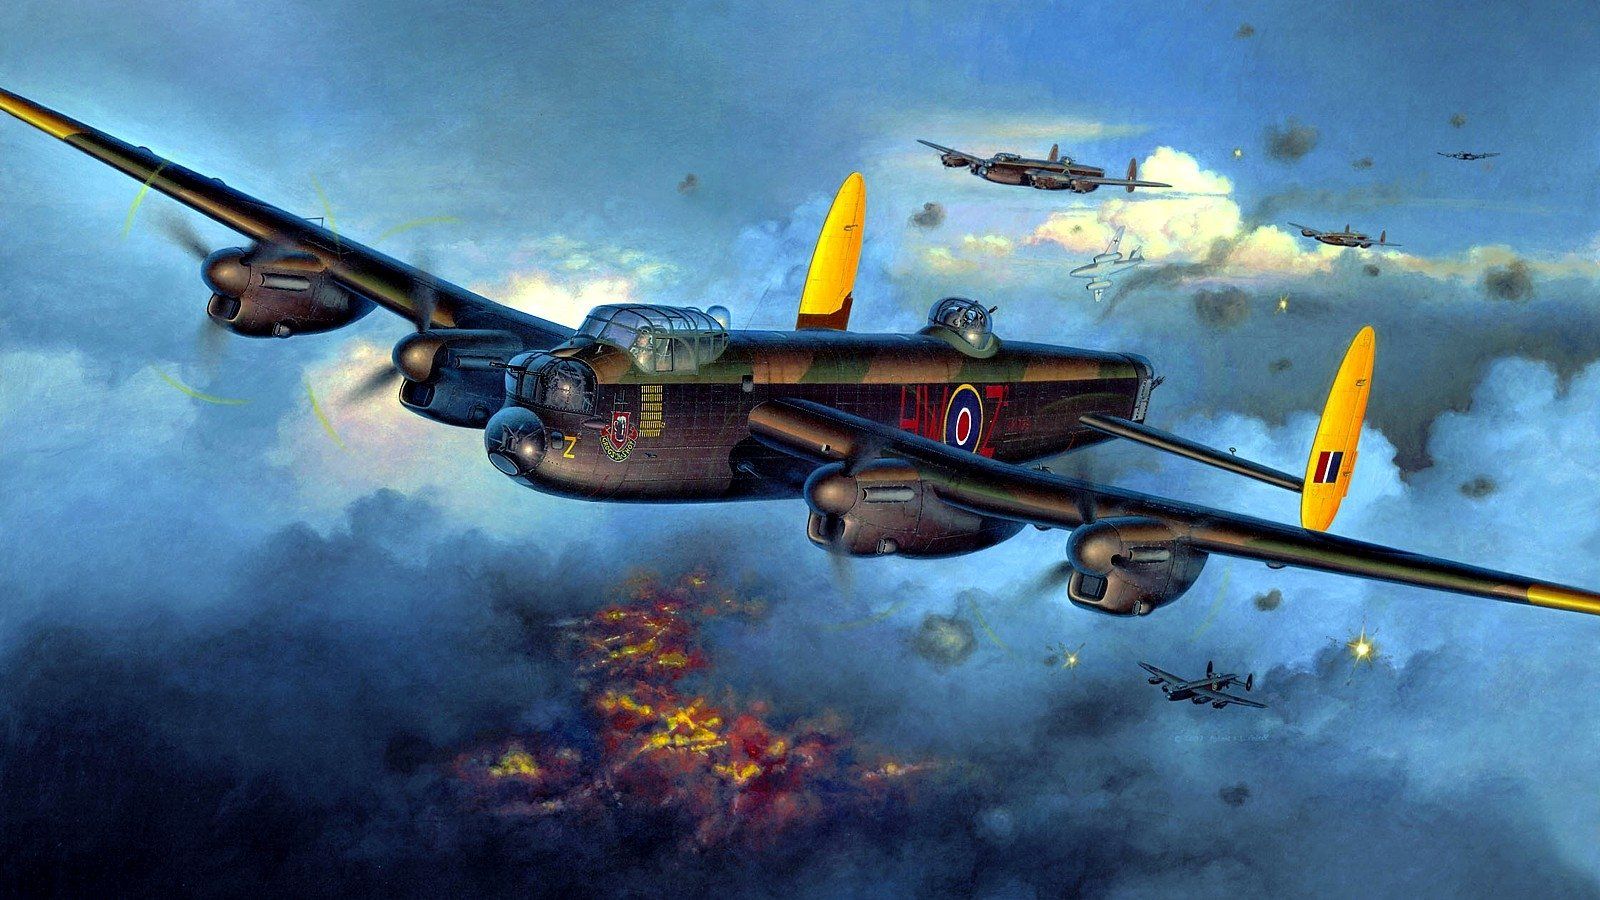 Avro Lancaster Wallpaper and Background Imagex900